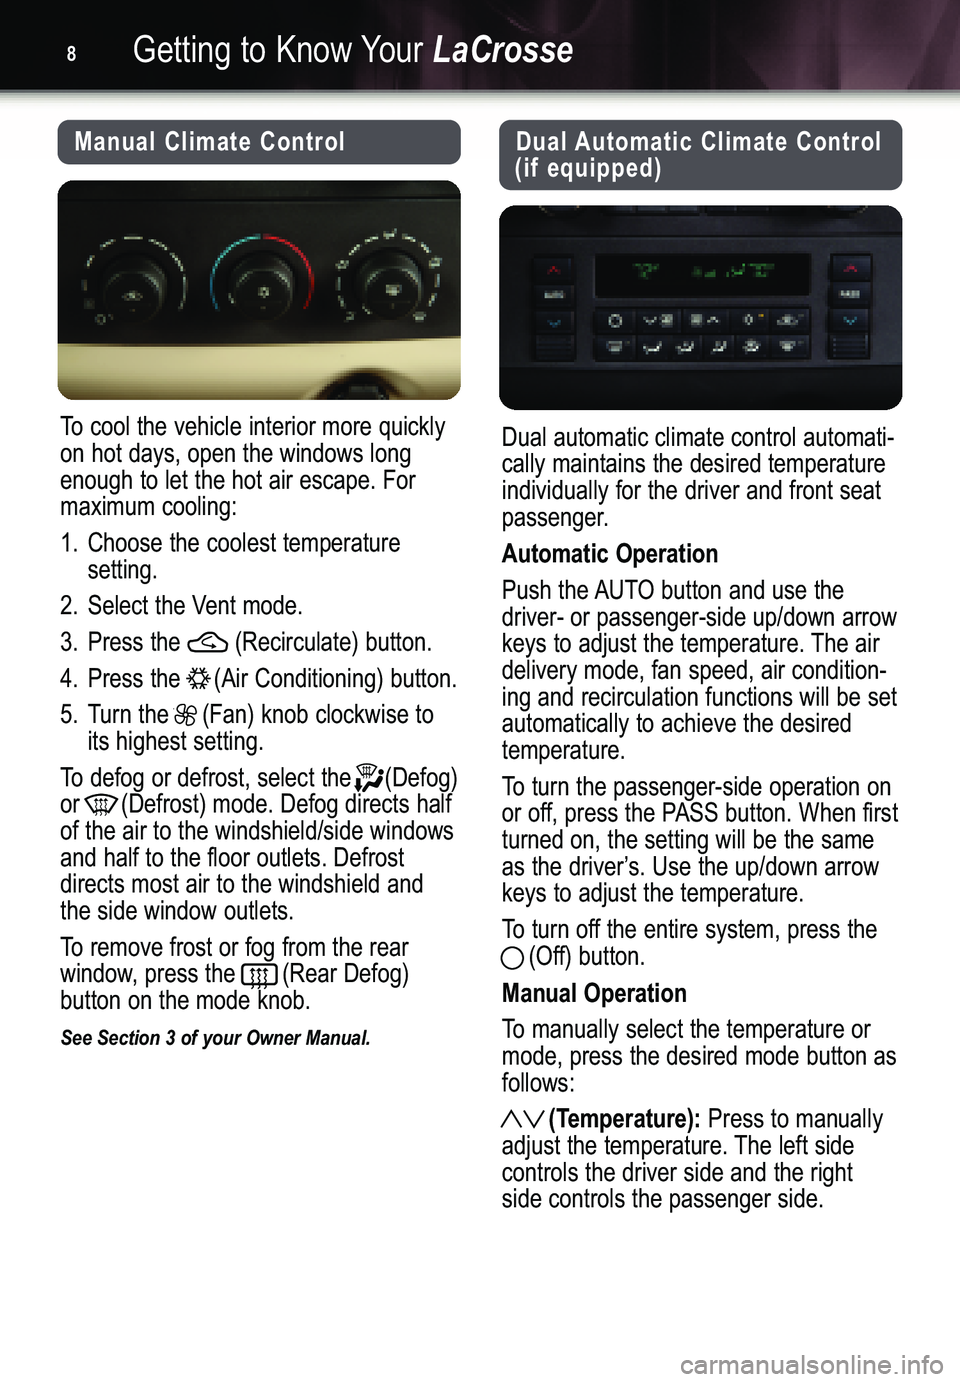 BUICK LACROSSE 2005  Get To Know Guide Getting to Know YourLaCrosse8
Manual Climate Control
To cool the vehicle interior more quickly
on hot days, open the windows longenough to let the hot air escape. Formaximum cooling:
1. Choose the coo